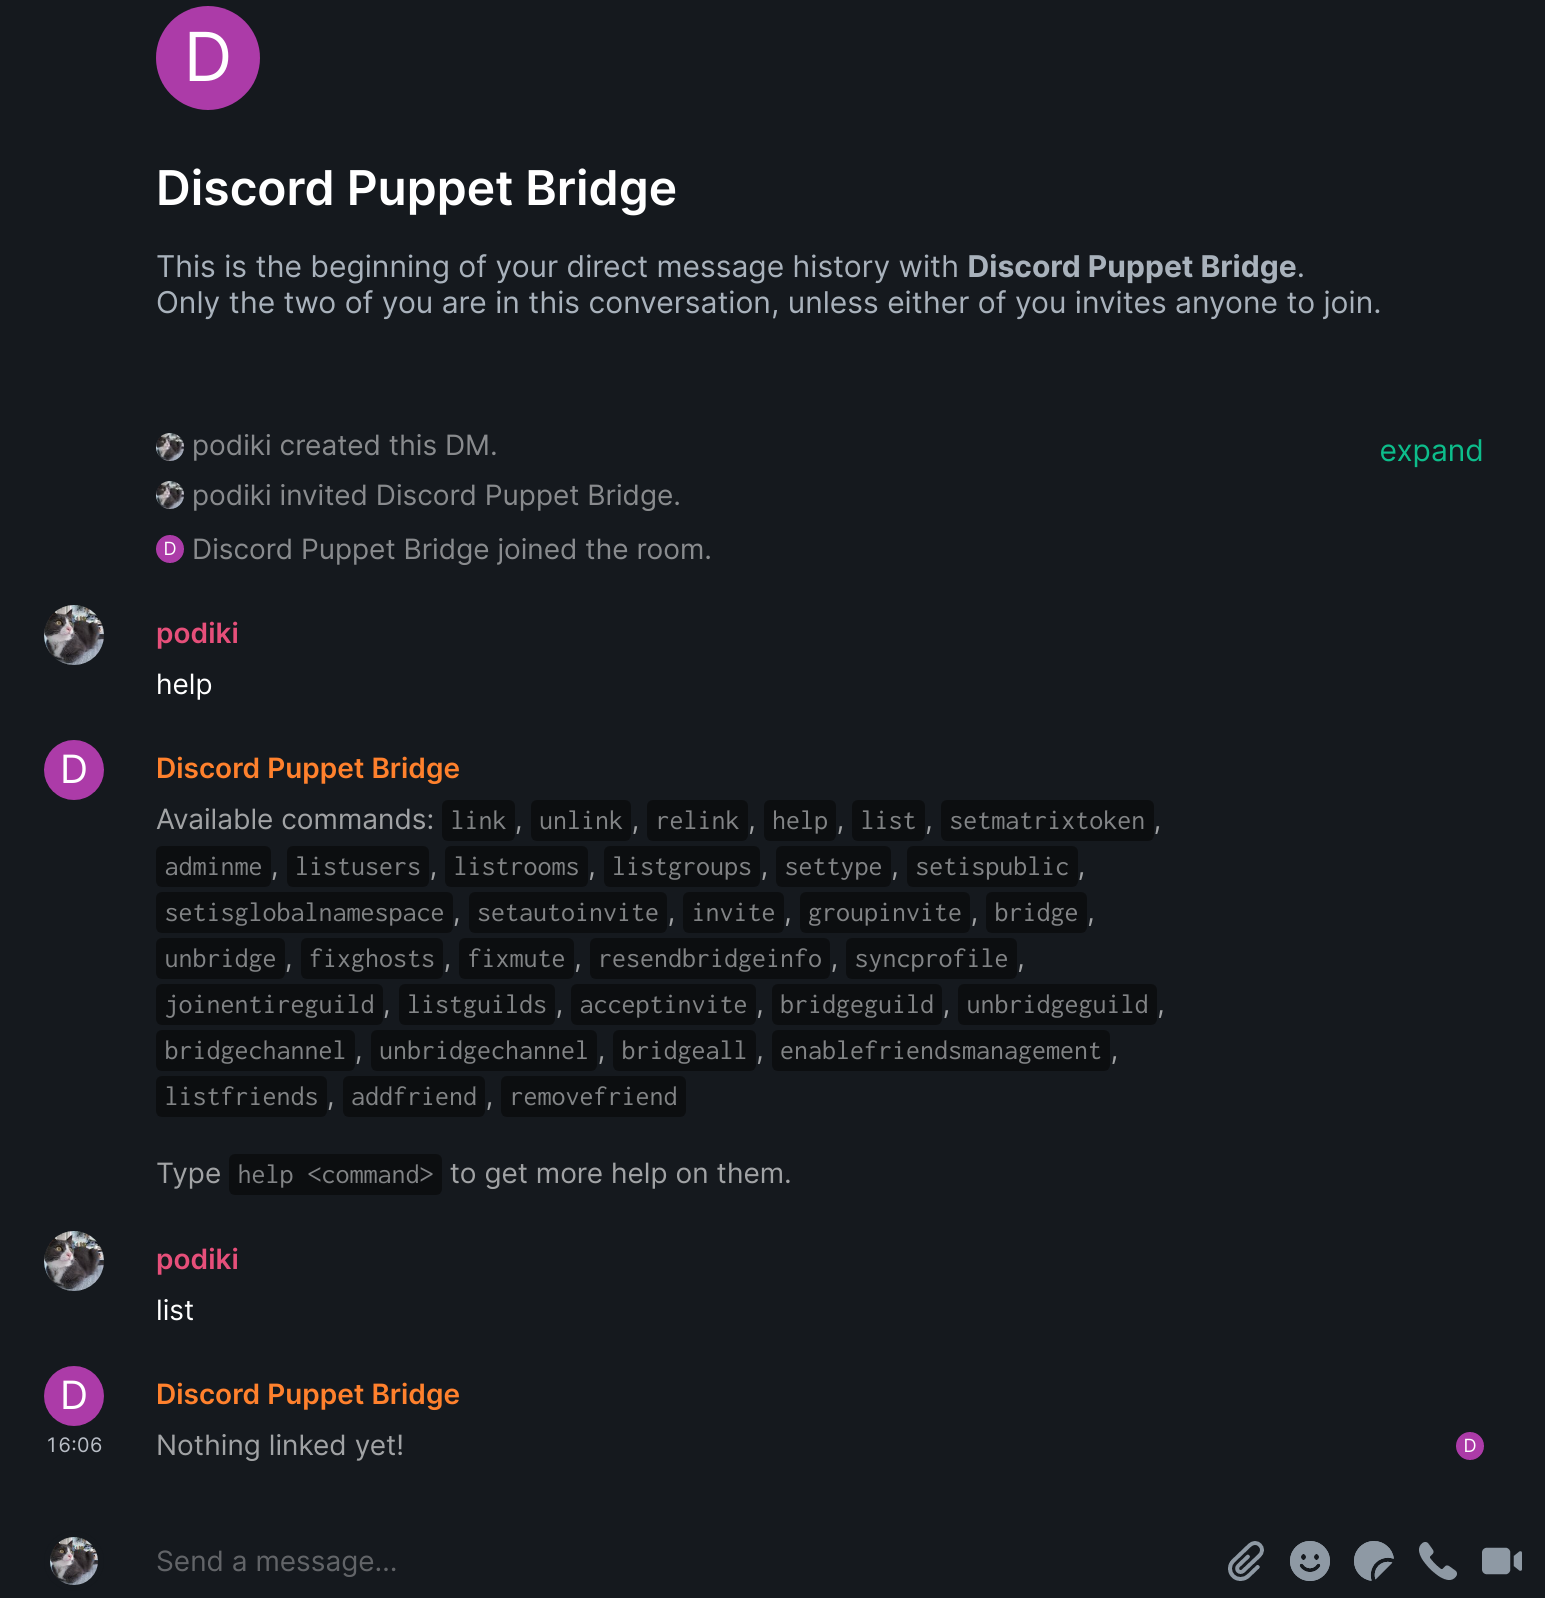 Chat with the Discord Puppet Bridge bot to send commands and bridge the different rooms.